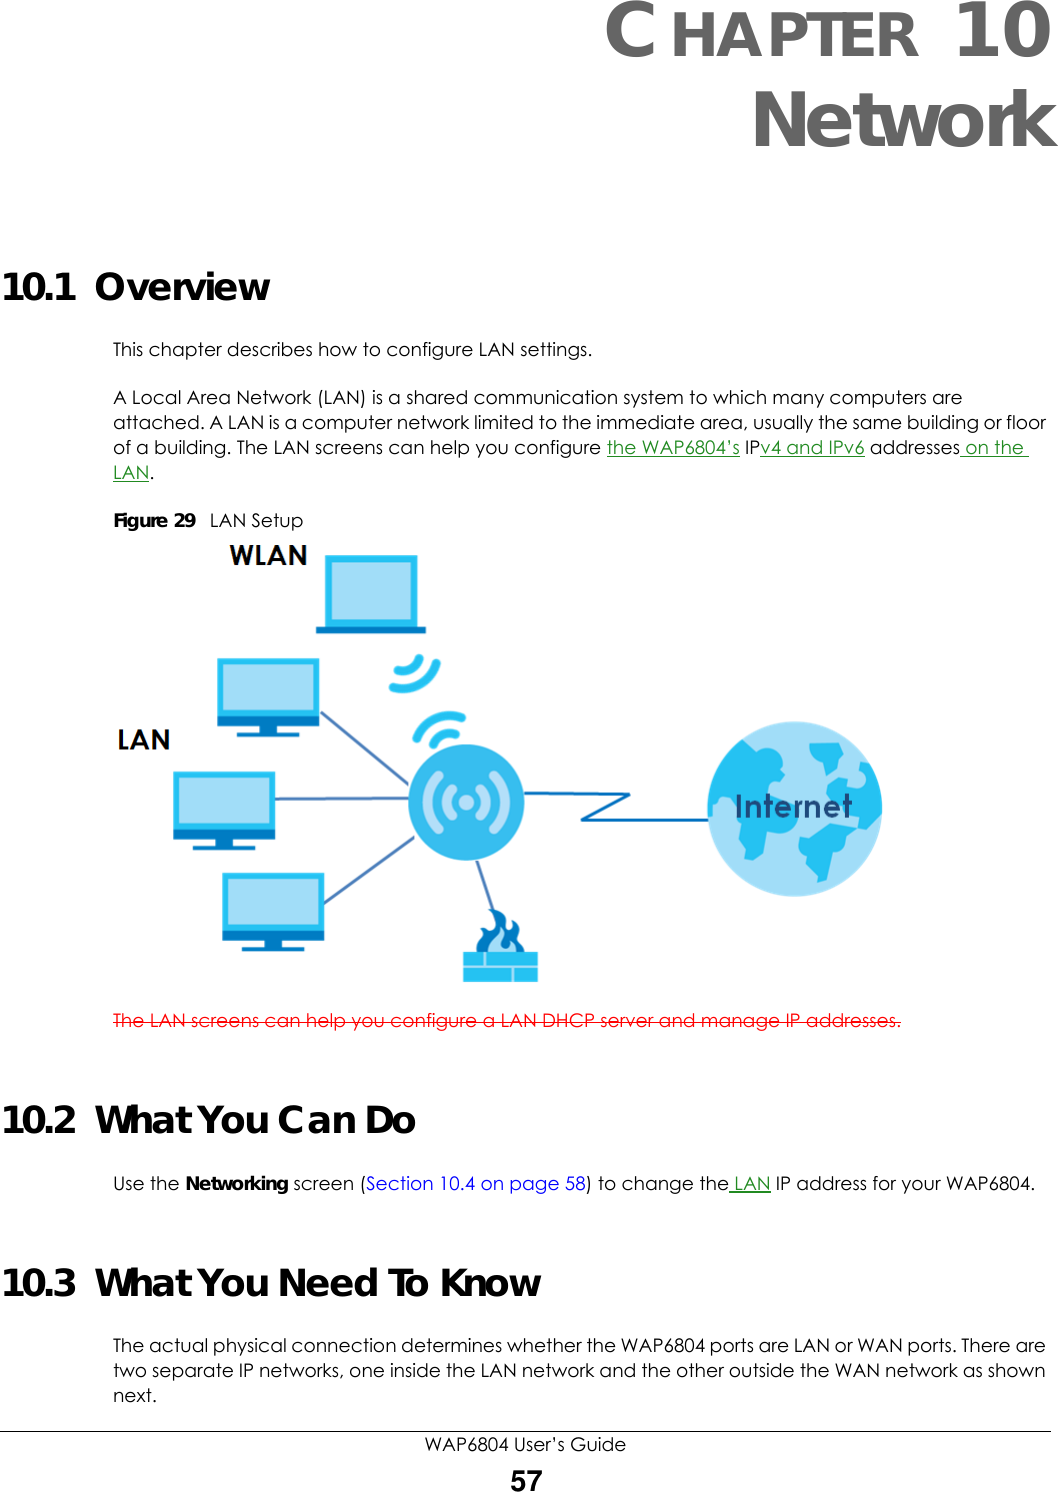 WAP6804 User’s Guide57CHAPTER 10Network10.1  OverviewThis chapter describes how to configure LAN settings.A Local Area Network (LAN) is a shared communication system to which many computers are attached. A LAN is a computer network limited to the immediate area, usually the same building or floor of a building. The LAN screens can help you configure the WAP6804’s IPv4 and IPv6 addresses on the LAN.Figure 29   LAN SetupThe LAN screens can help you configure a LAN DHCP server and manage IP addresses.10.2  What You Can DoUse the Networking screen (Section 10.4 on page 58) to change the LAN IP address for your WAP6804.10.3  What You Need To KnowThe actual physical connection determines whether the WAP6804 ports are LAN or WAN ports. There are two separate IP networks, one inside the LAN network and the other outside the WAN network as shown next.